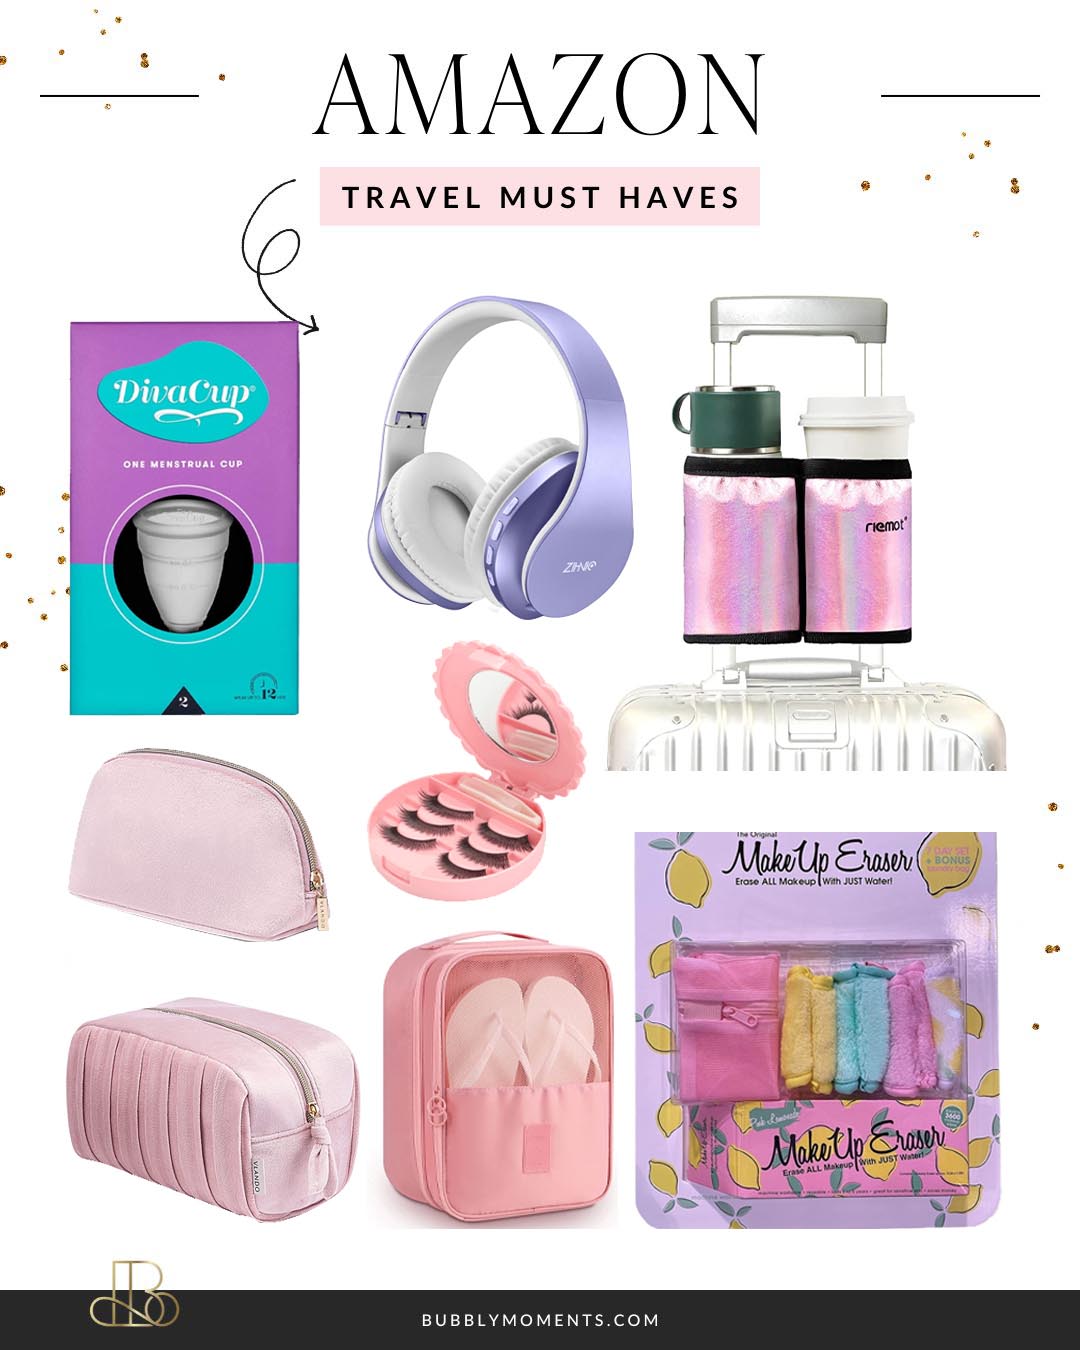 57 Brilliant Travel Accessories Every Traveller Must Have in 2023